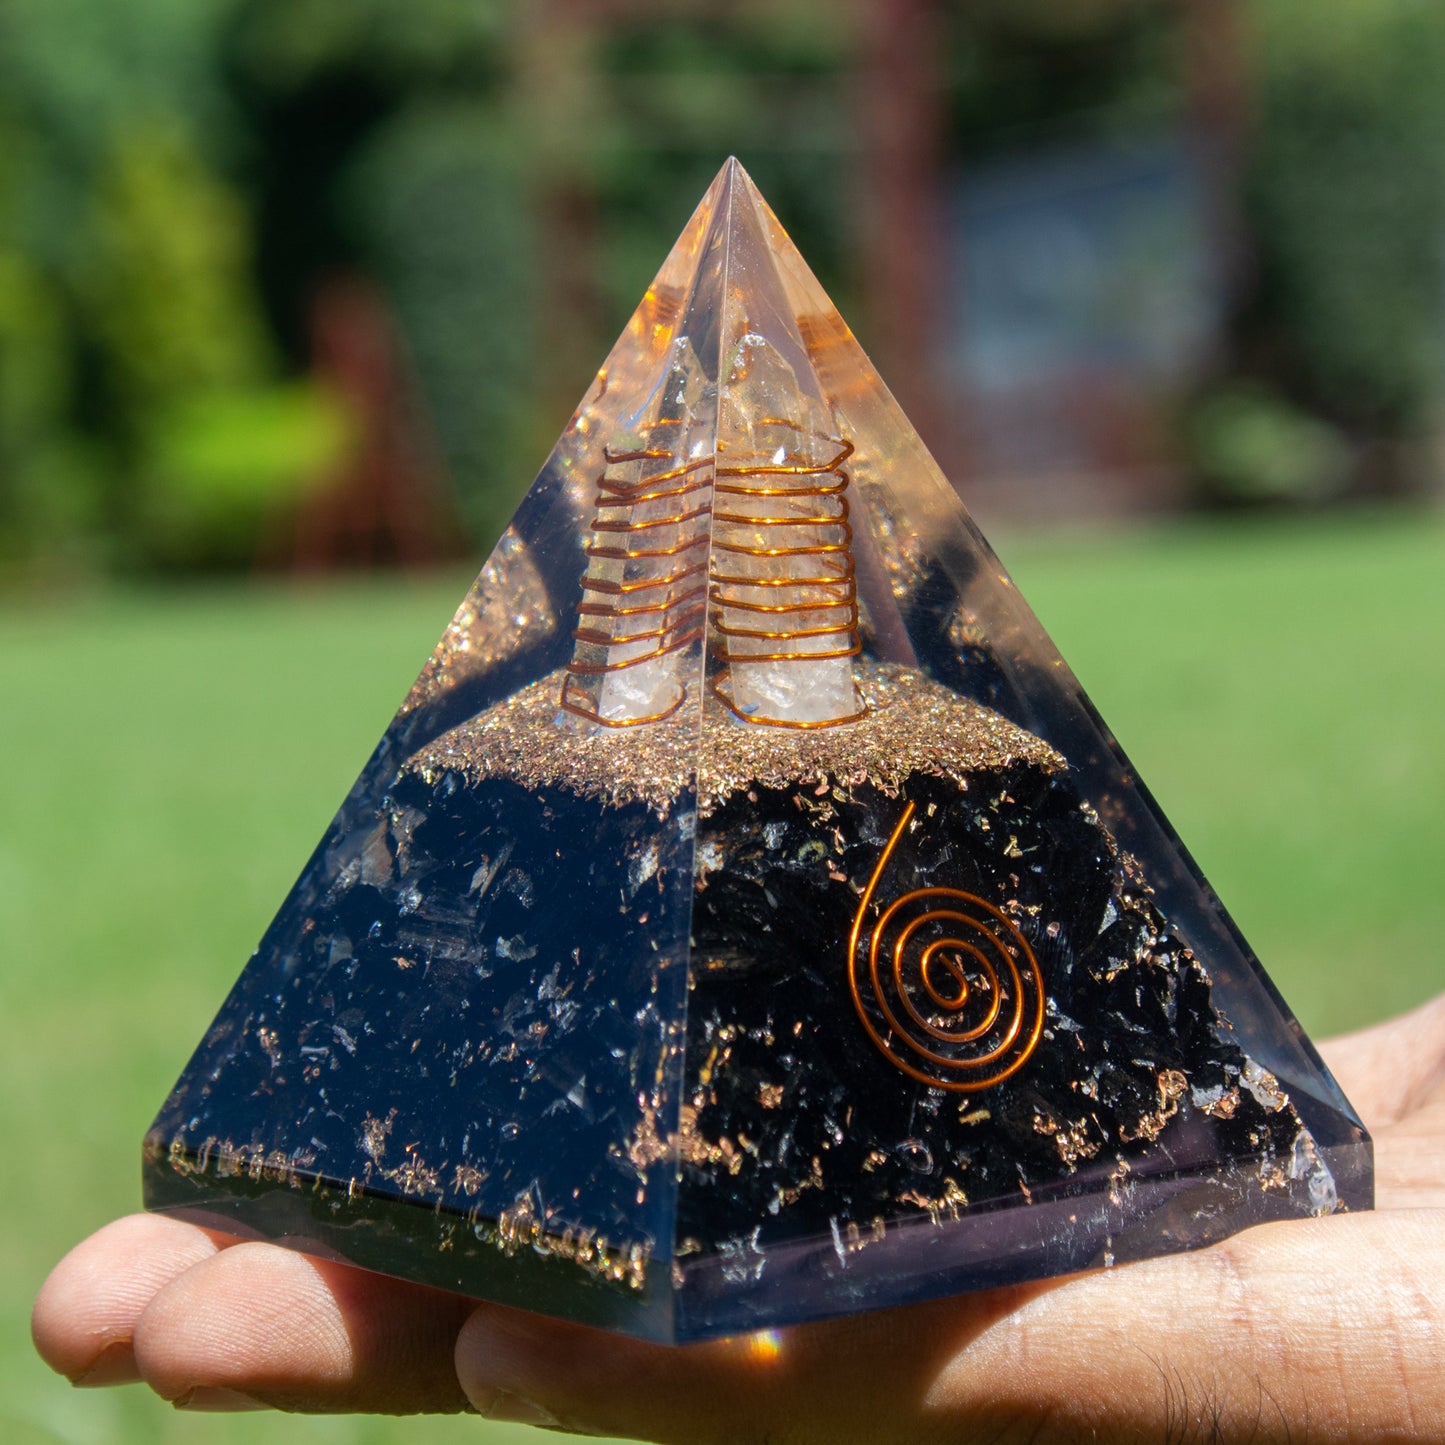 Shungite Orgonite Pyramid for EMF Protection, Grounding Energy, Spiritual Healing | Handmade Orgonite pyramids with Copper Coil and Crystal Quartz for Chakra Protection